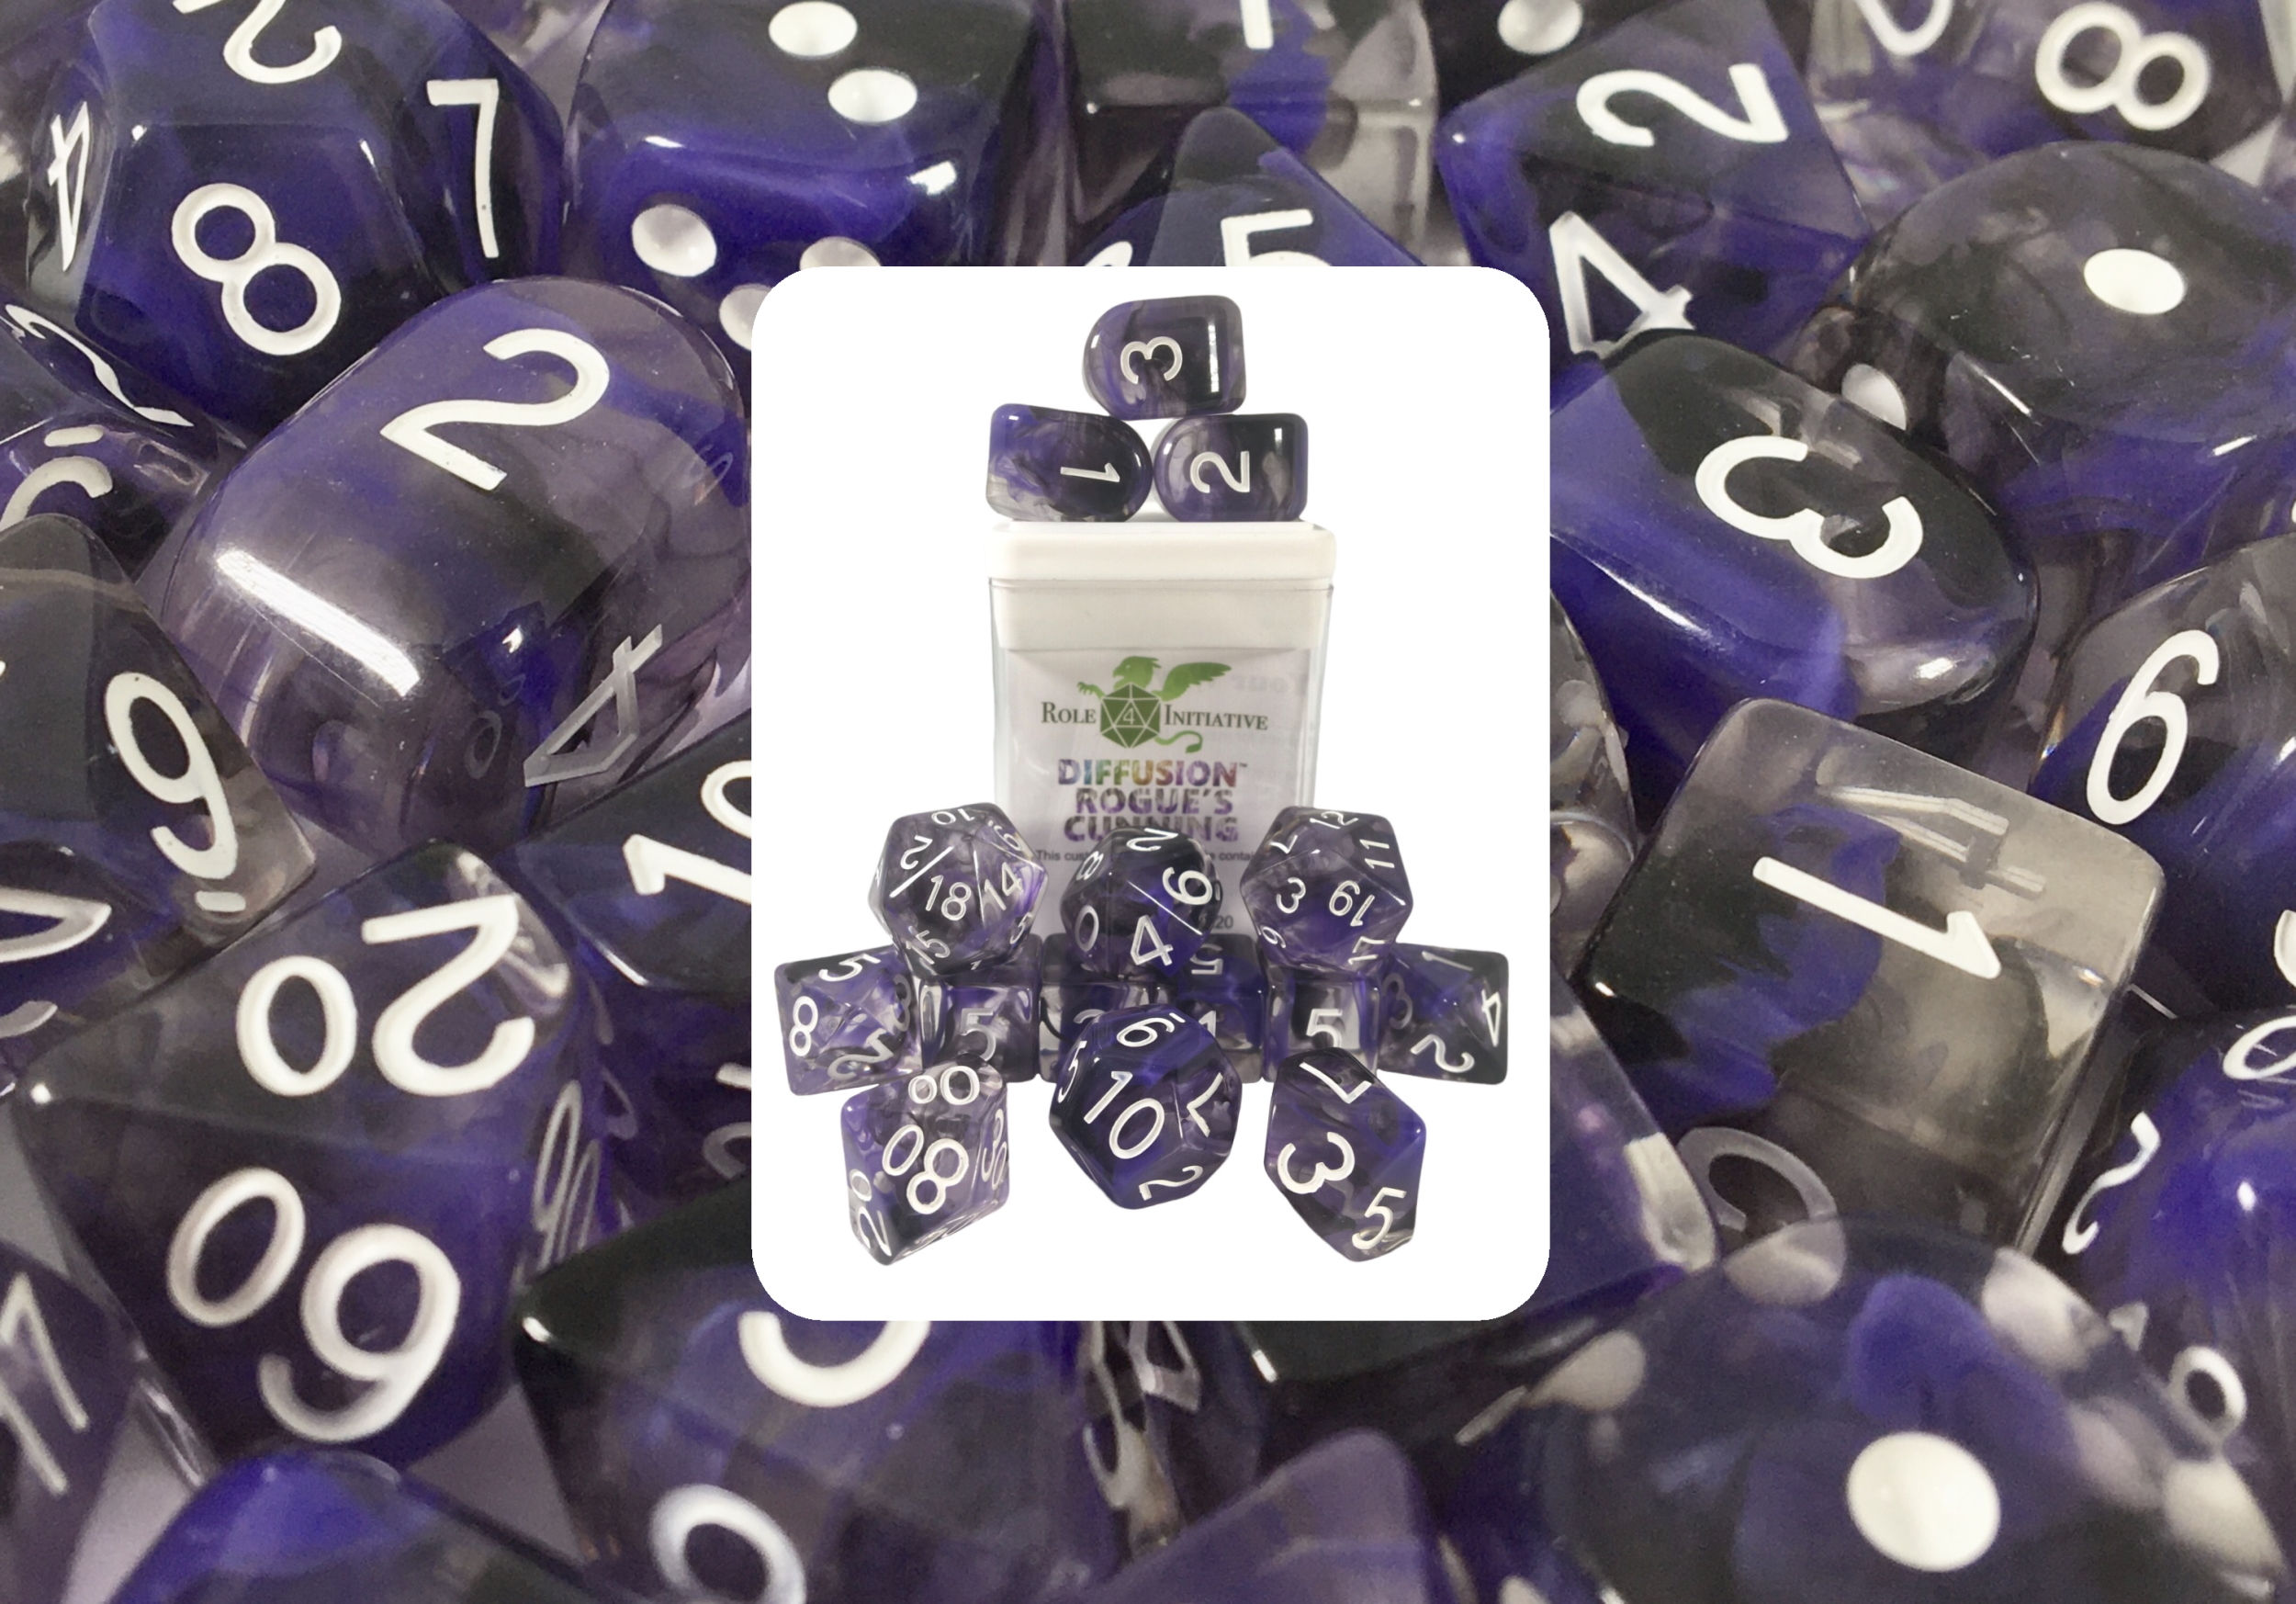 Role 4 Initiative: Polyhedral 15 Dice Set: Diffusion Rogues Cunning [Arch/ Balanced] 